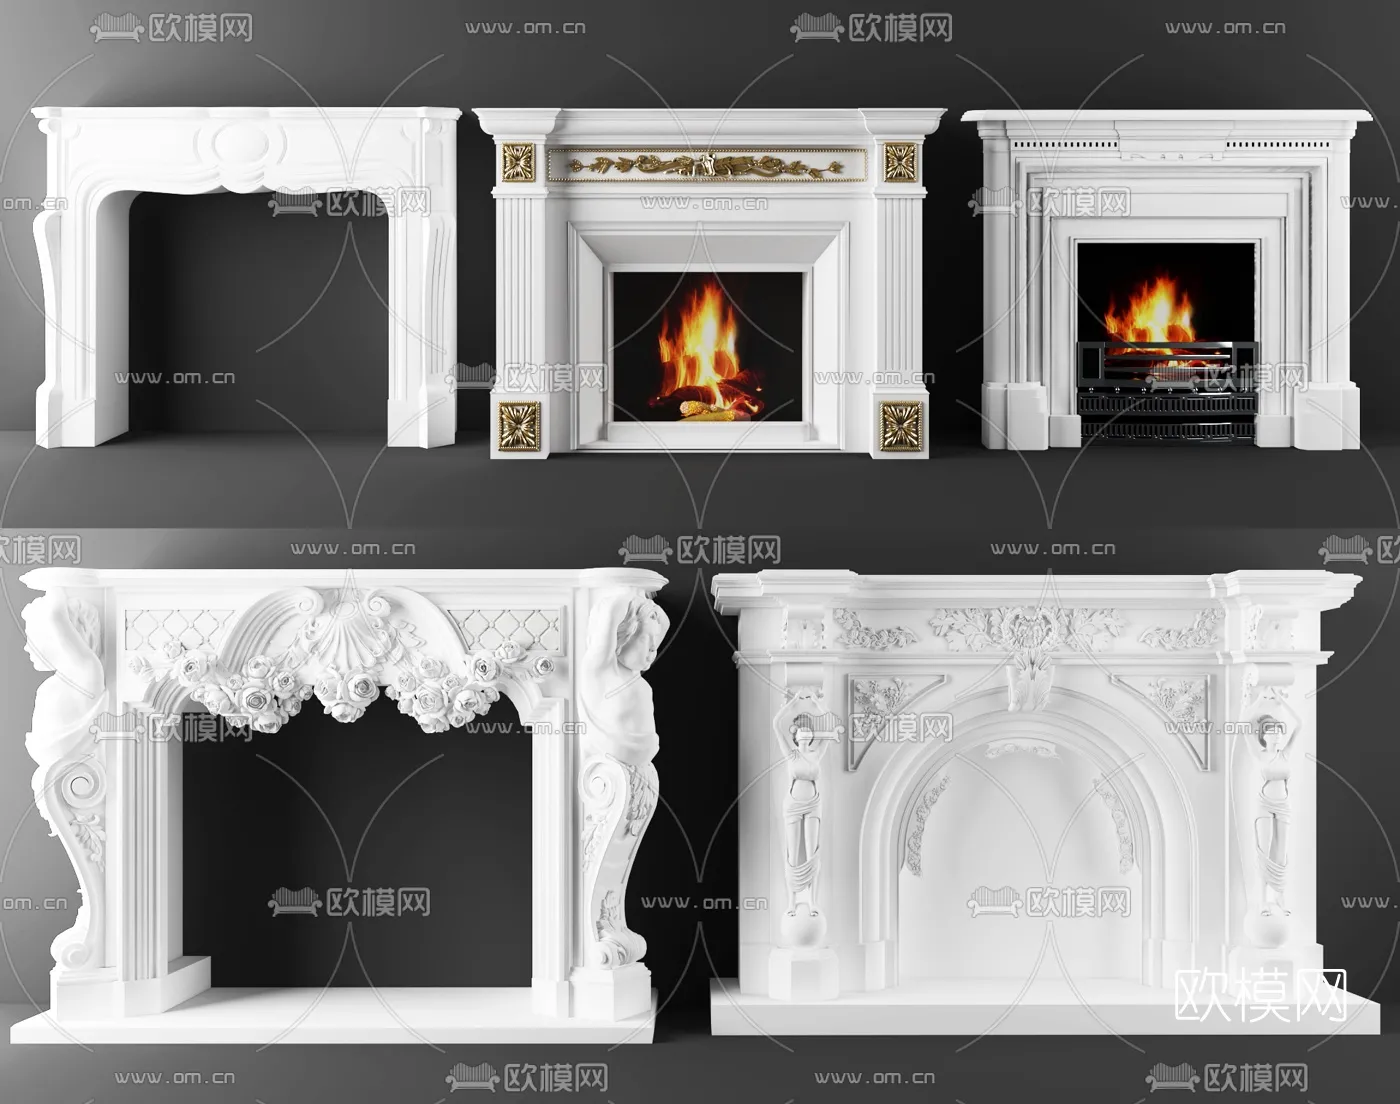 CLASSIC – FIREPLACE 3DMODELS – 051